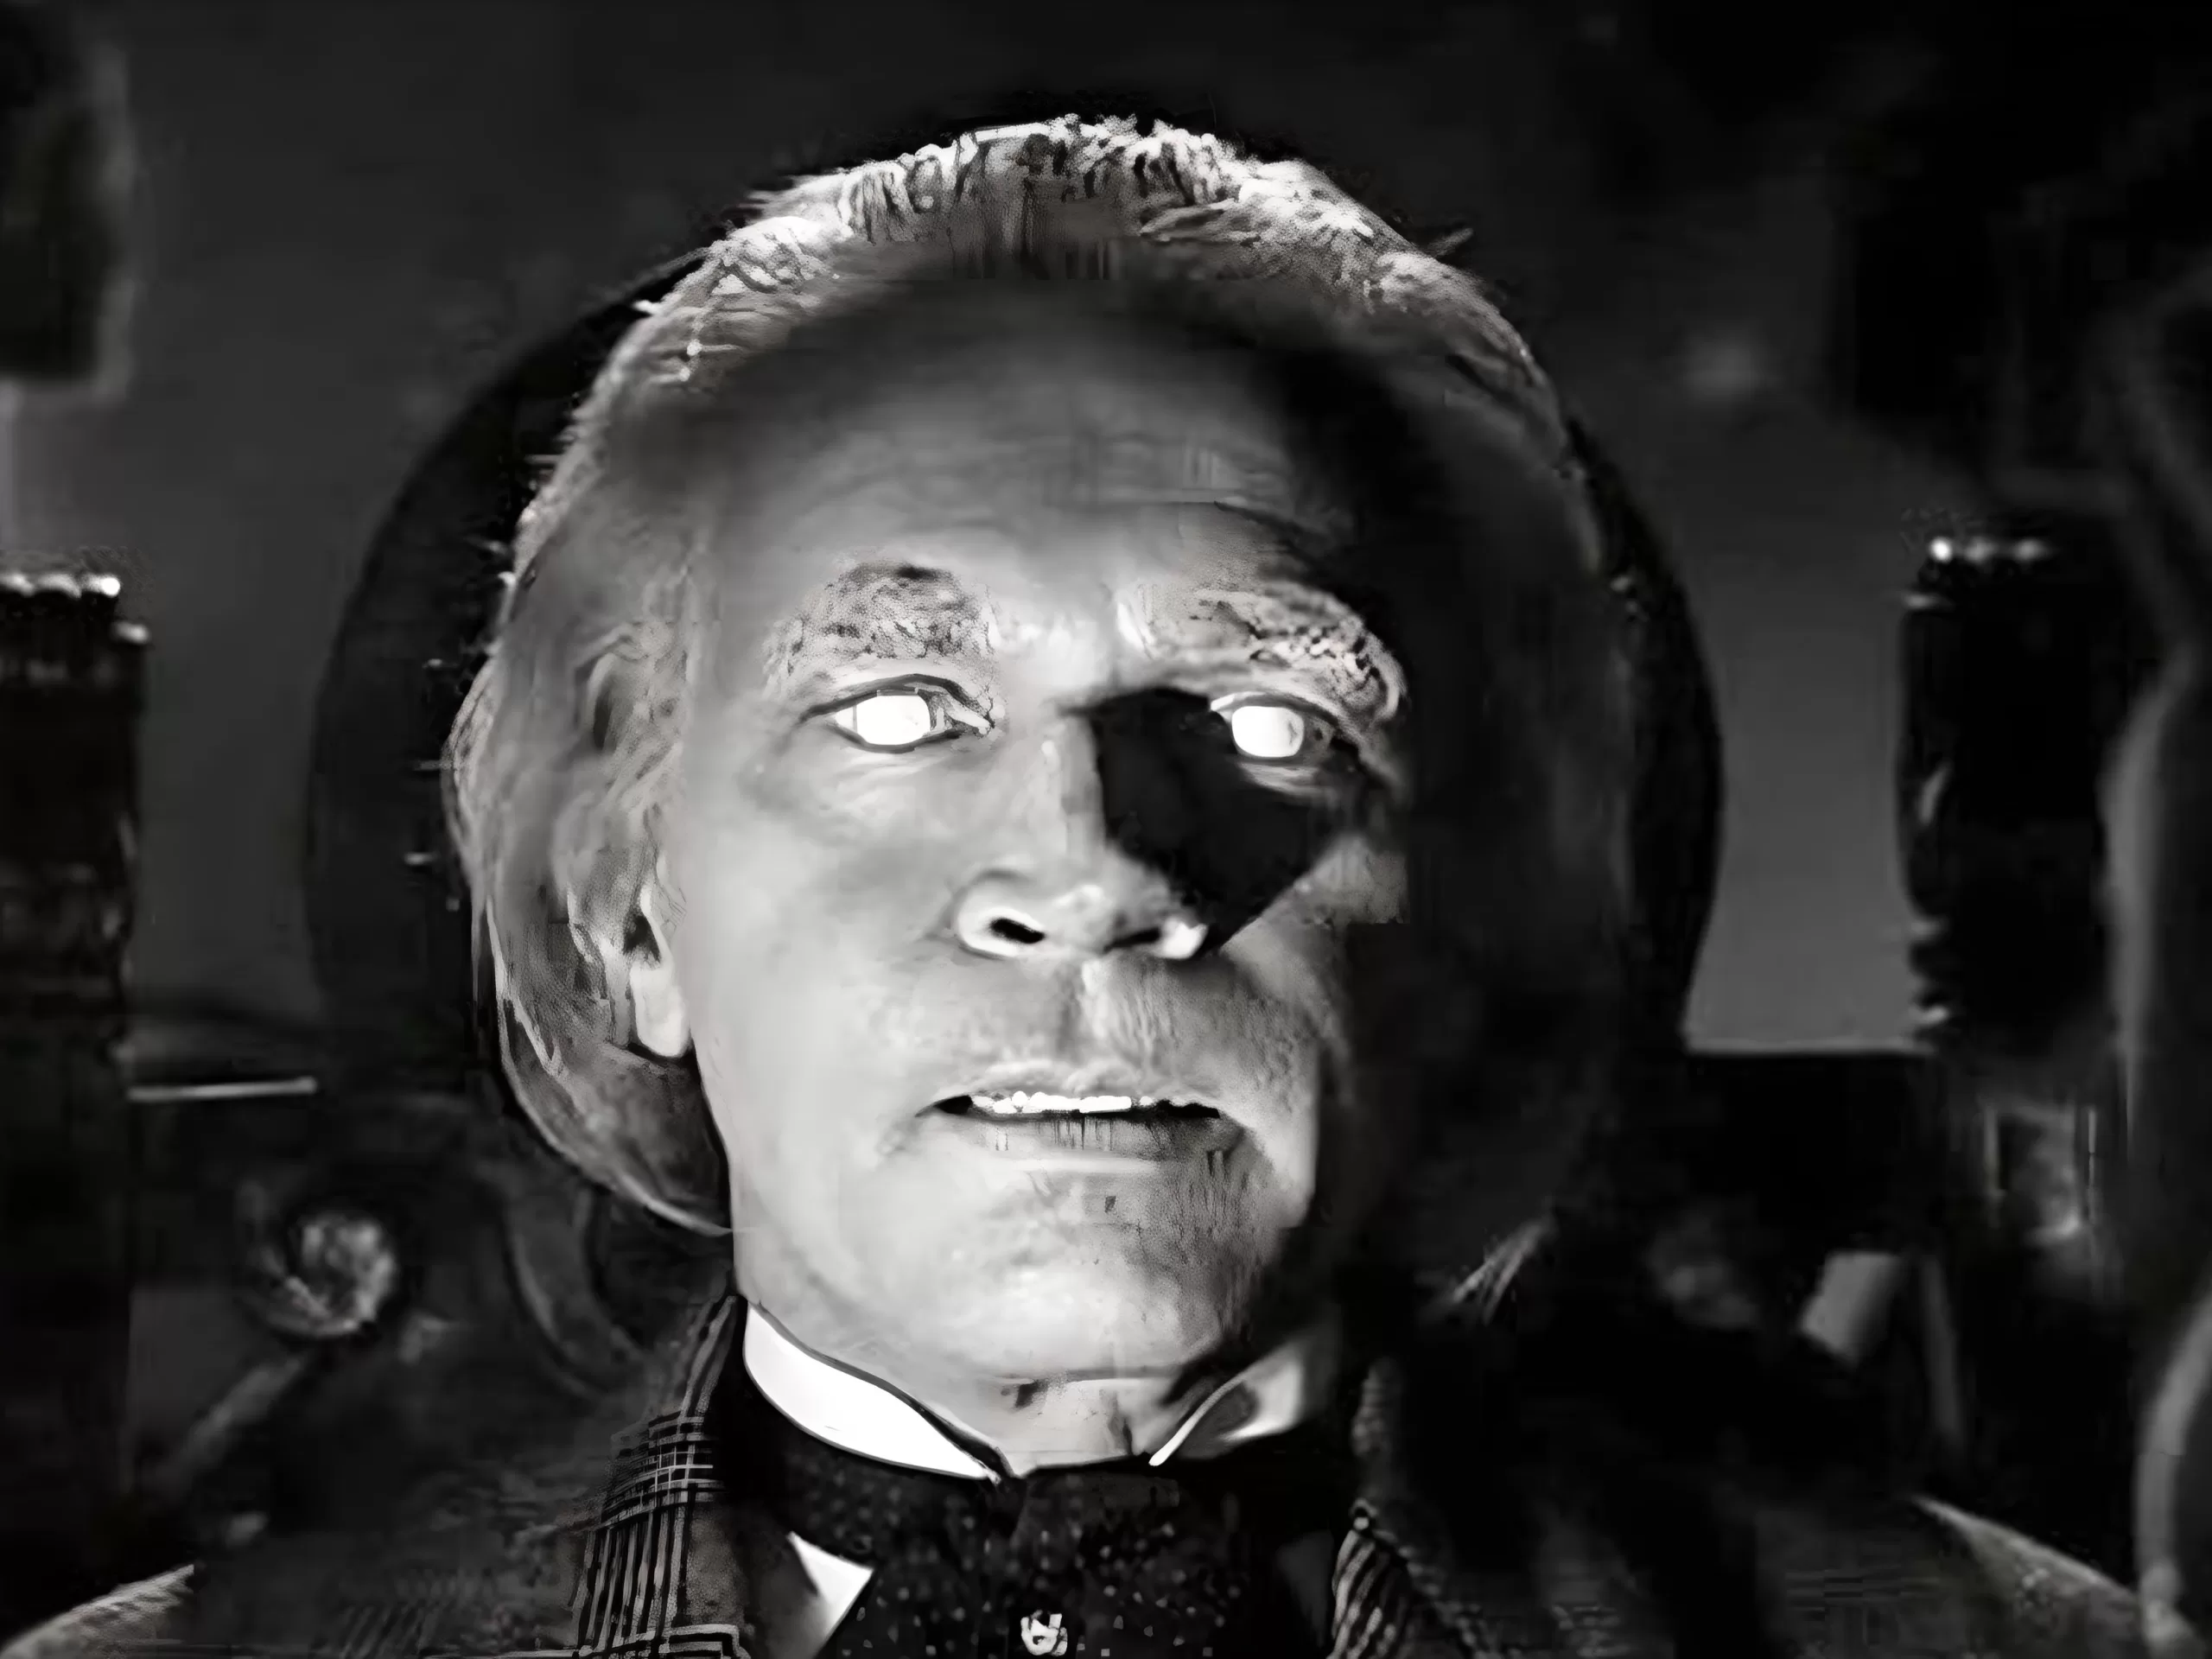 Dr. Mabuse: The Specter of Criminality